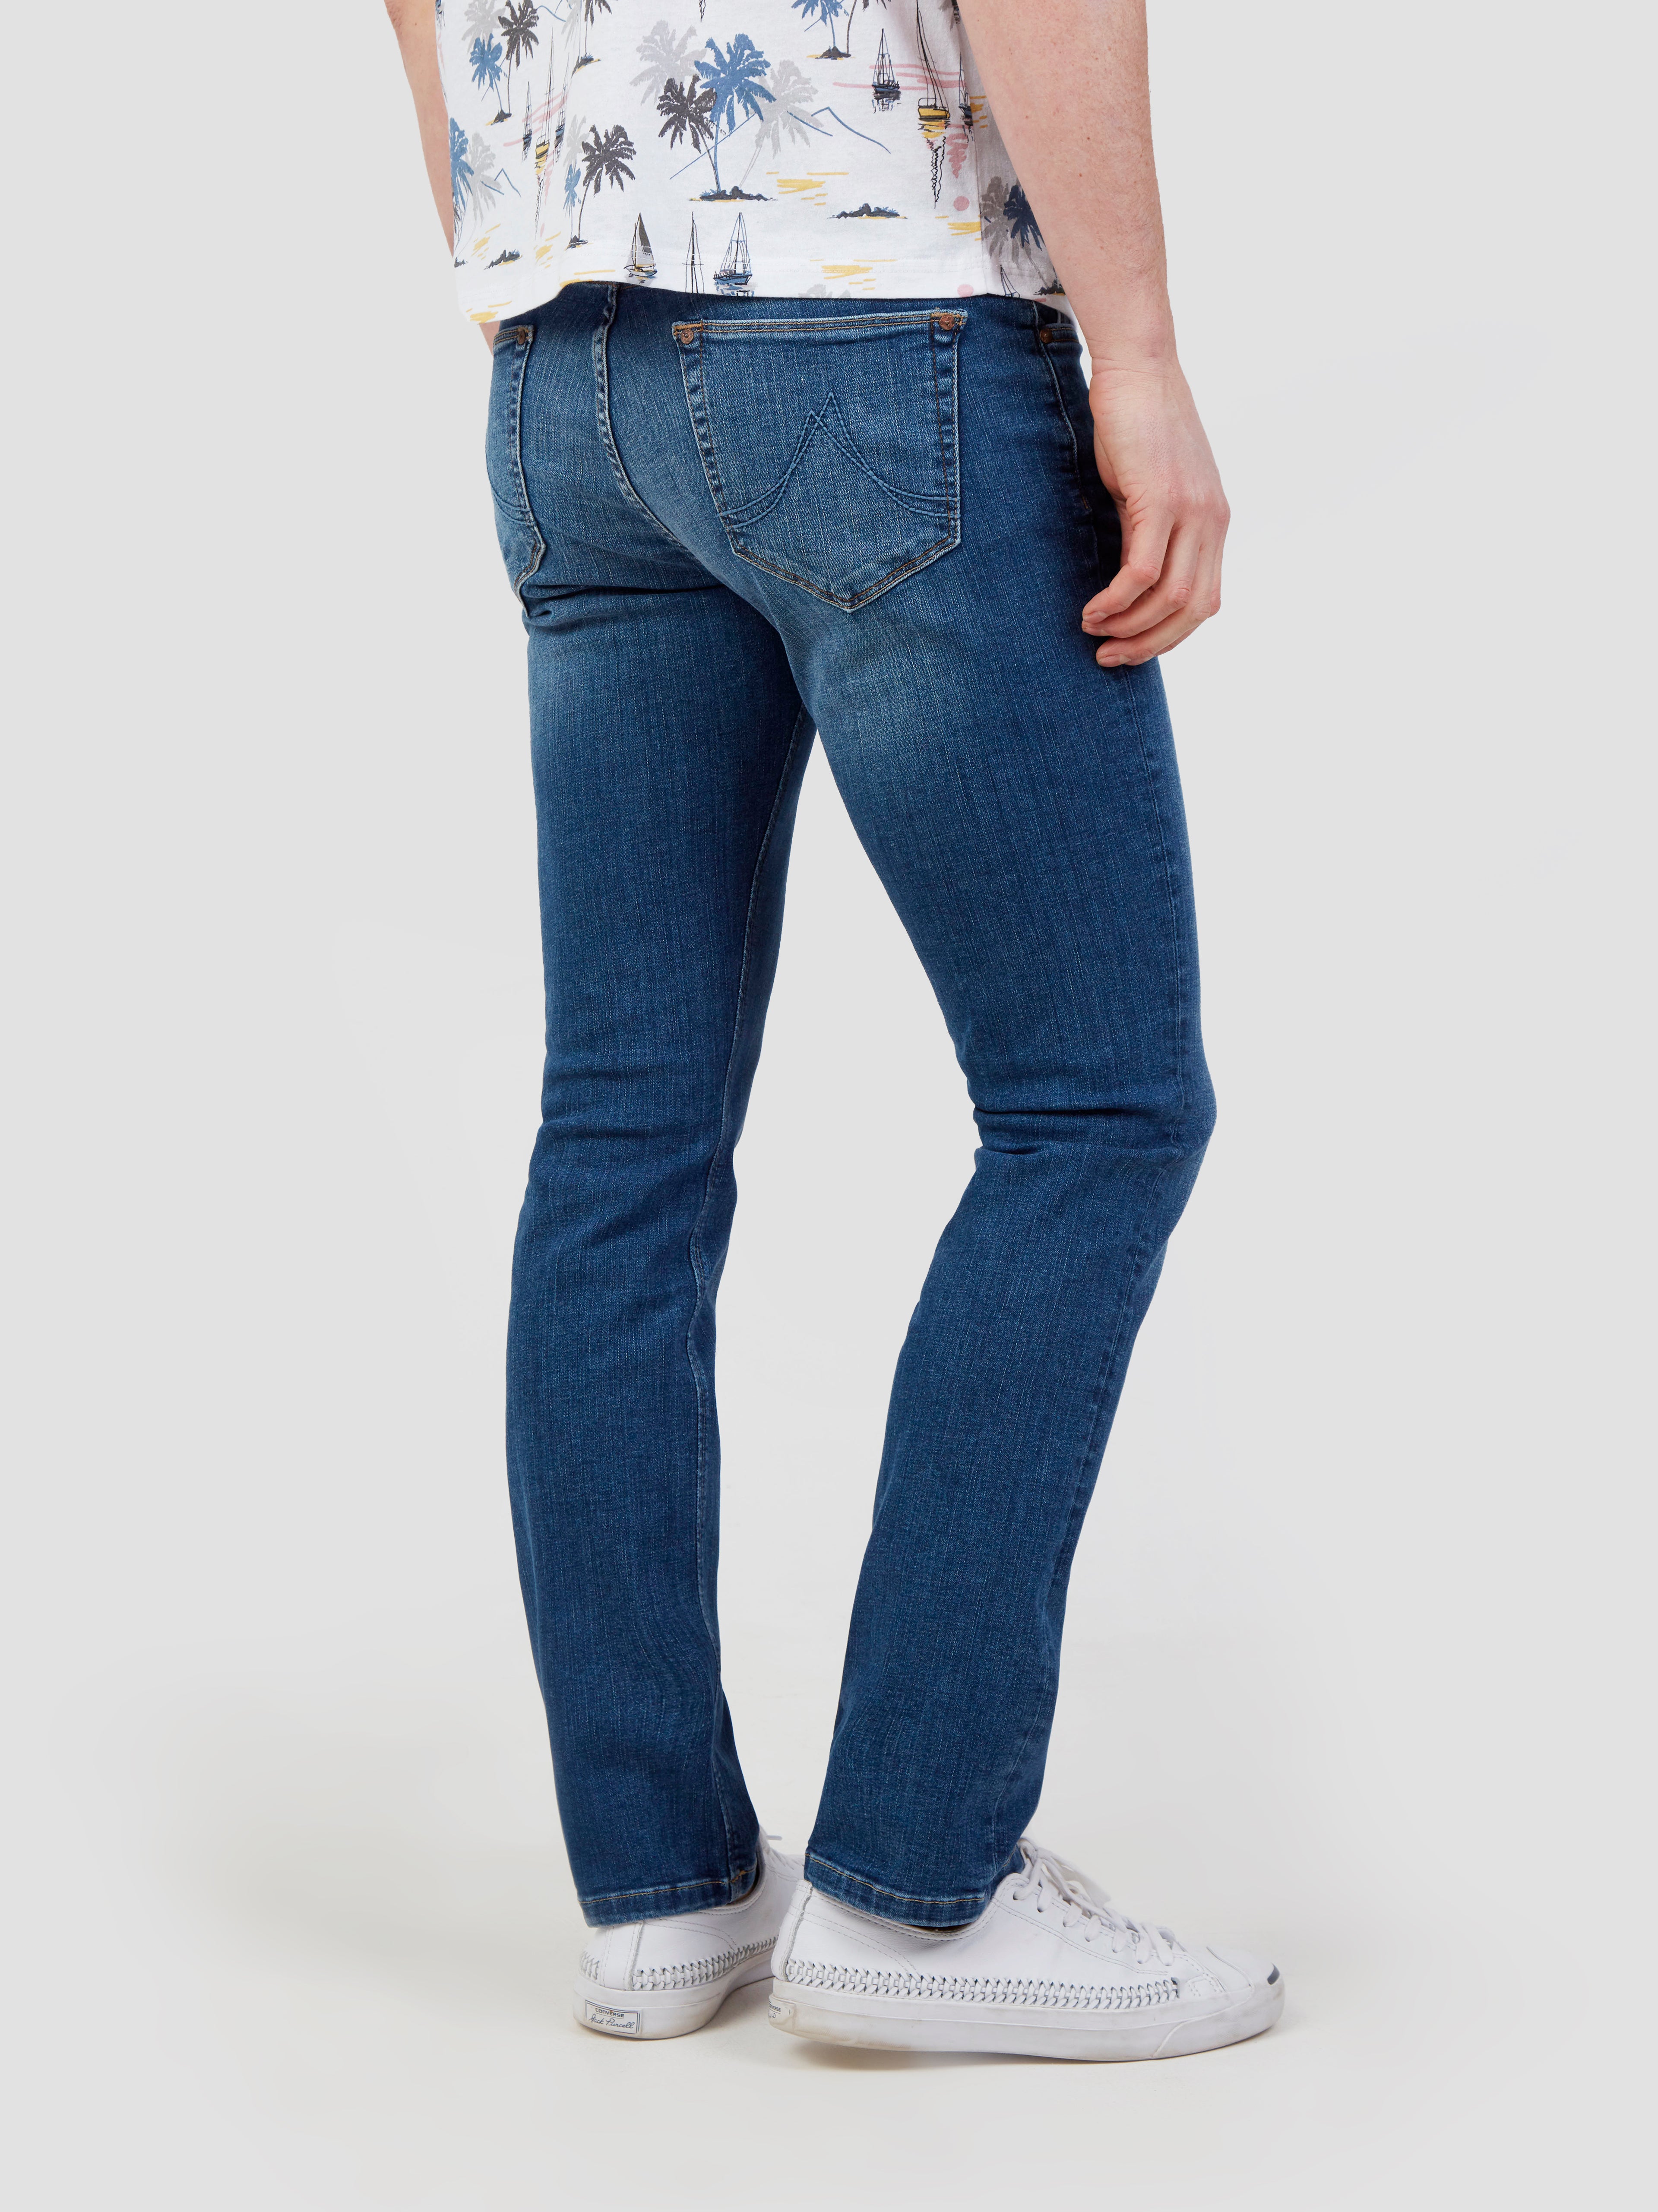 Denim Jeans with Ripped and frayed bottom. – Sandi's Styles